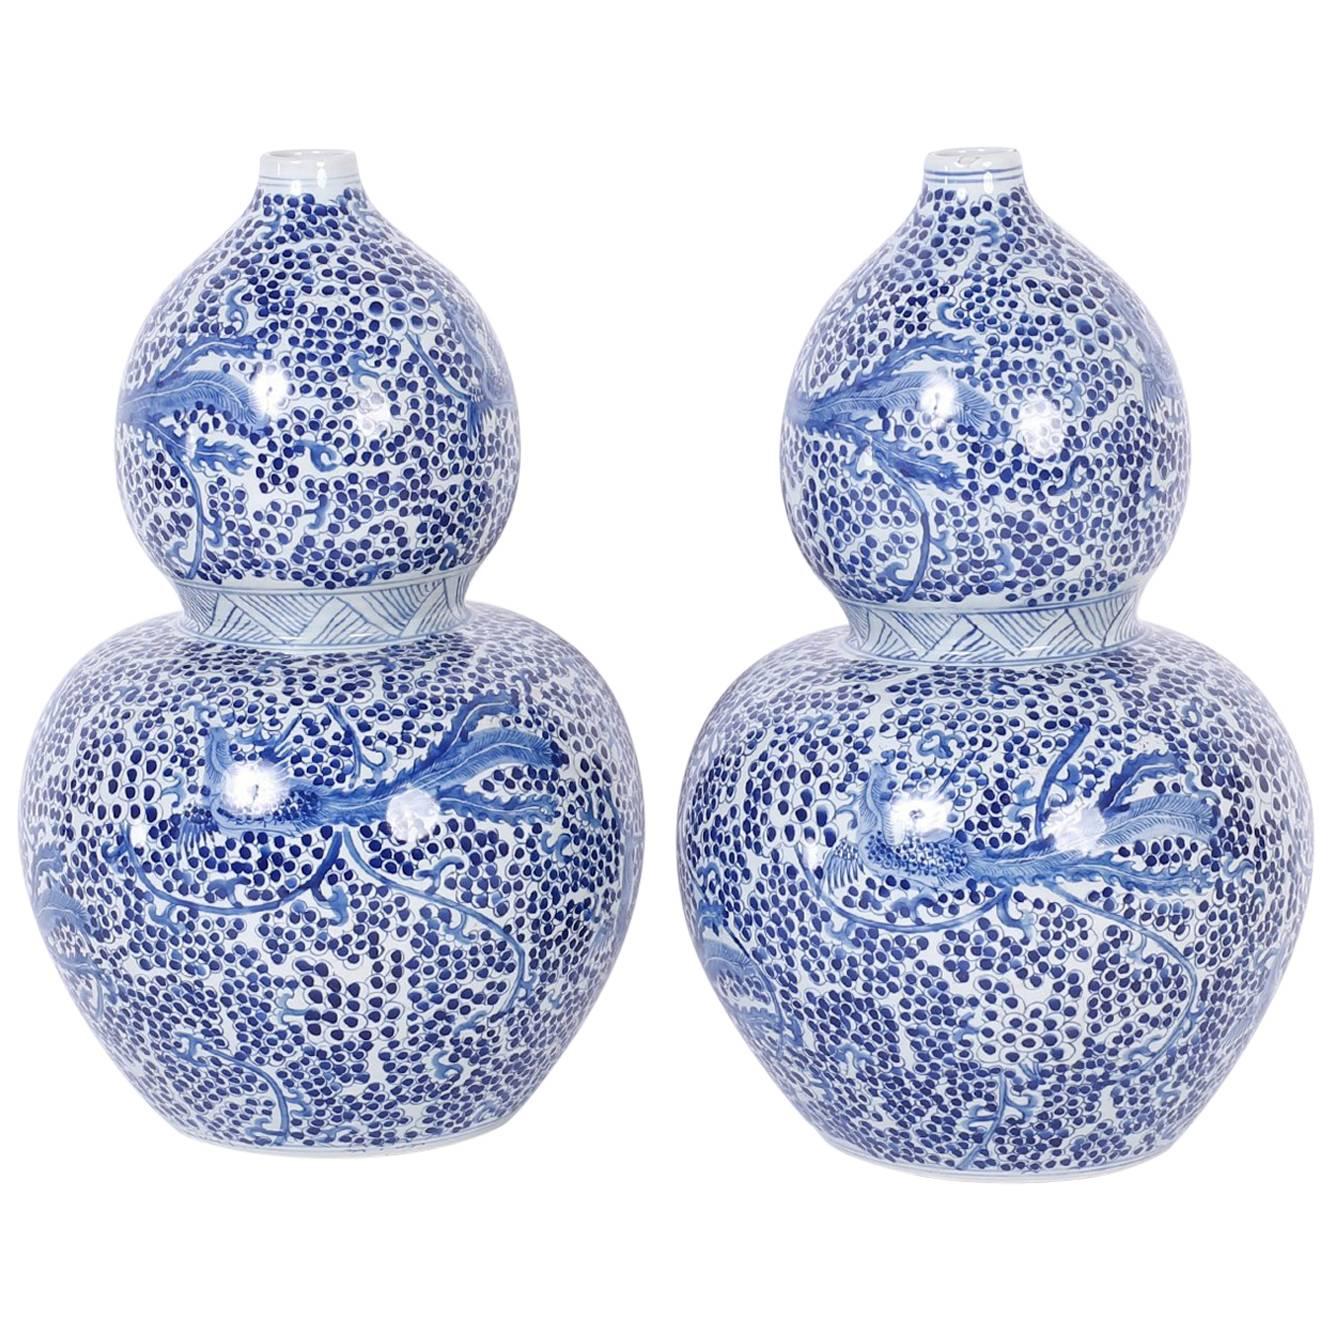 Pair of Chinese Export Style Blue and White Double Gourd Blue and White Vases